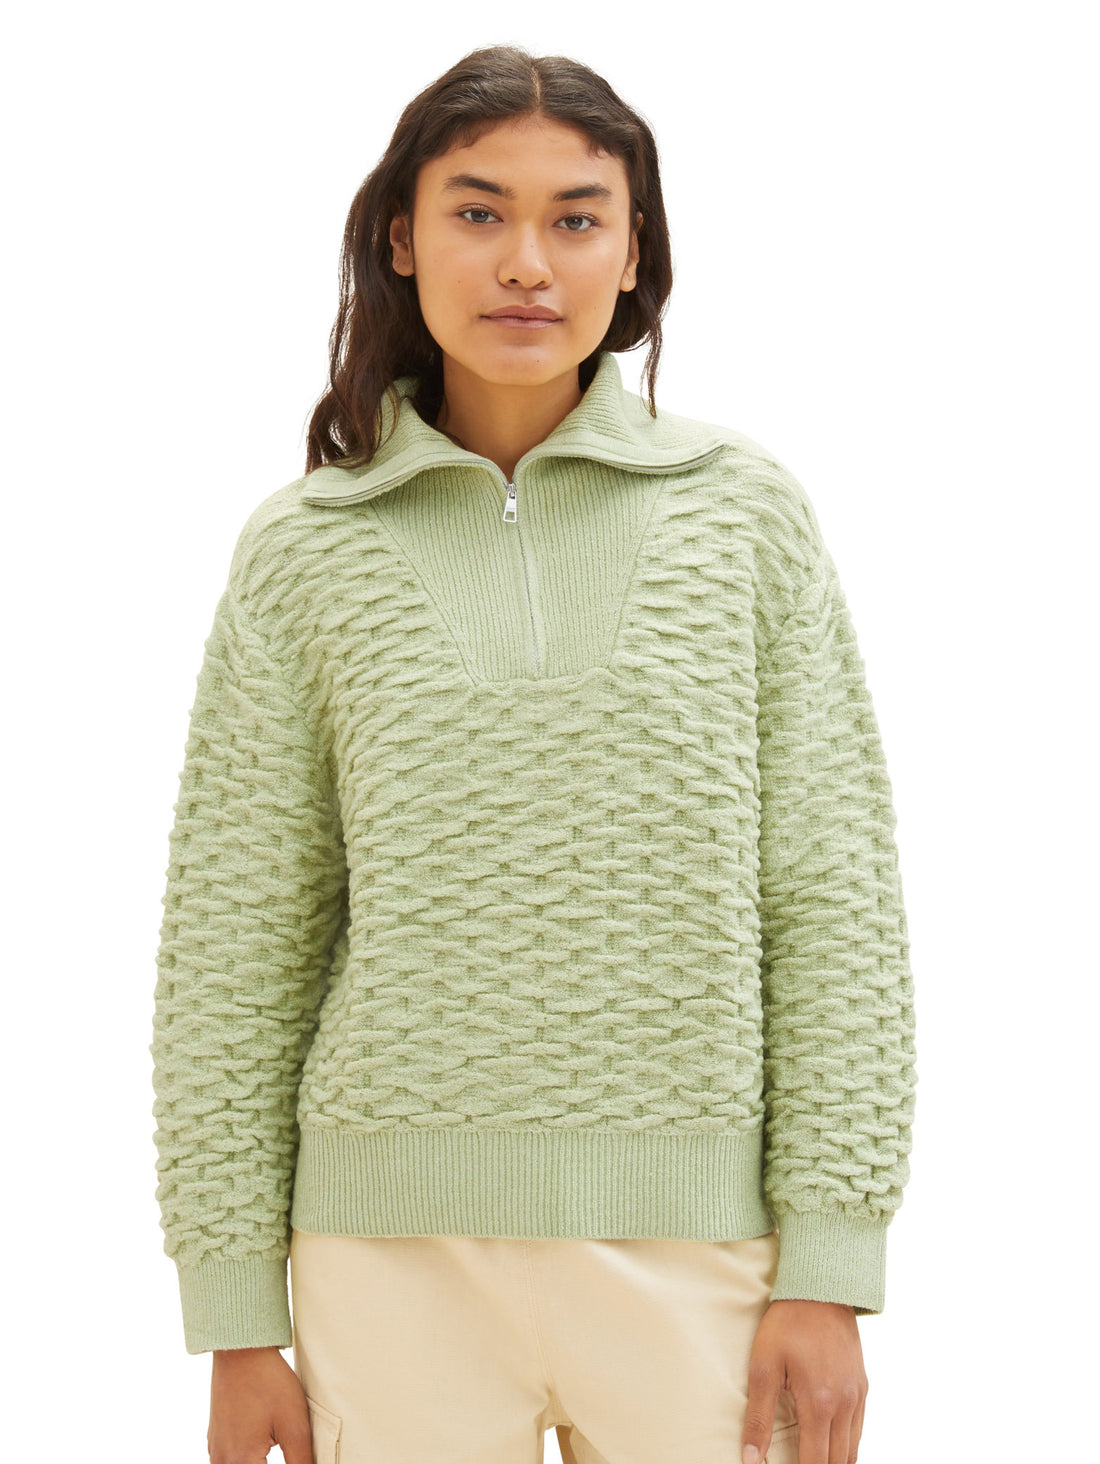 Knitted Sweater With Quarter Zip_1038155_32256_05